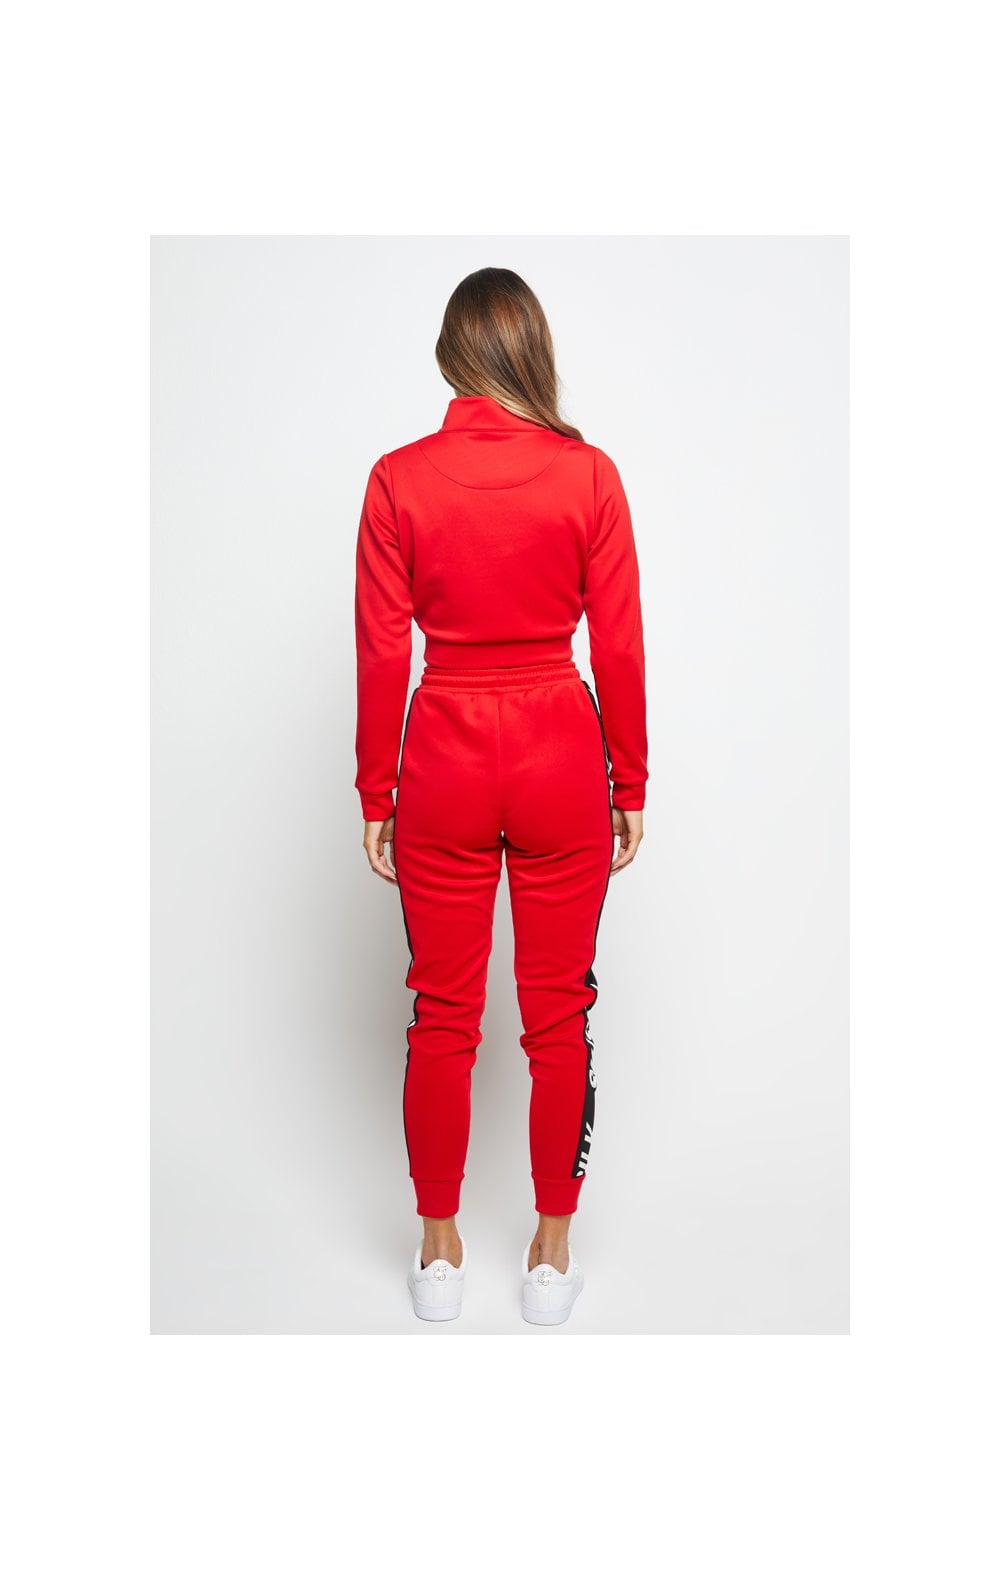 SikSilk Chaser Track Top - Red (2)